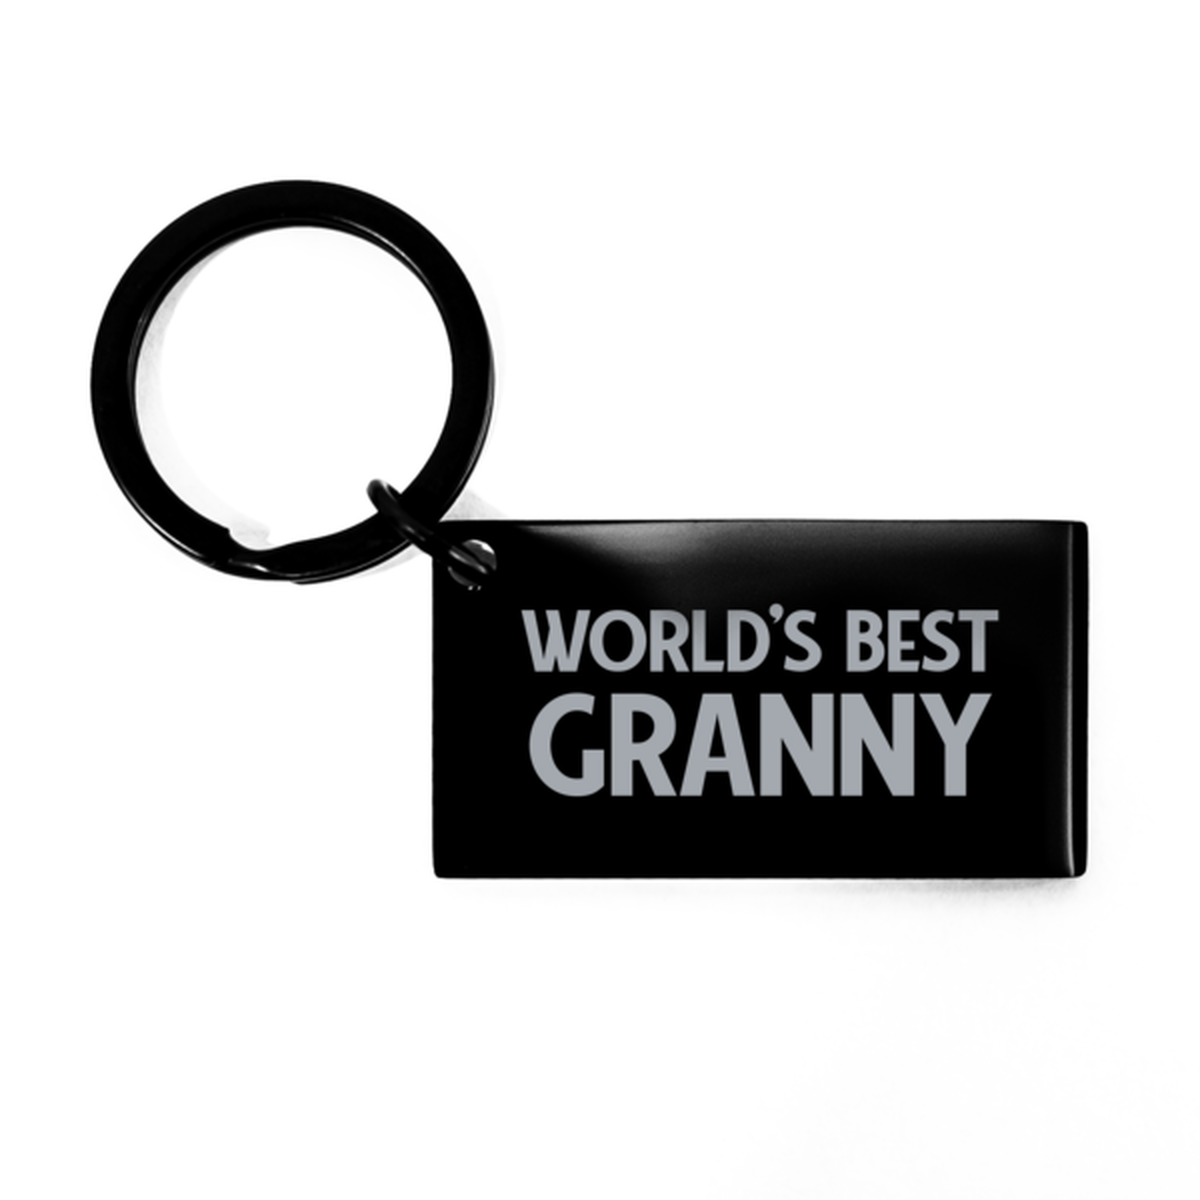 Worlds Best Granny Gifts, Funny Black Engraved Keychain For Granny, Birthday Presents For Women